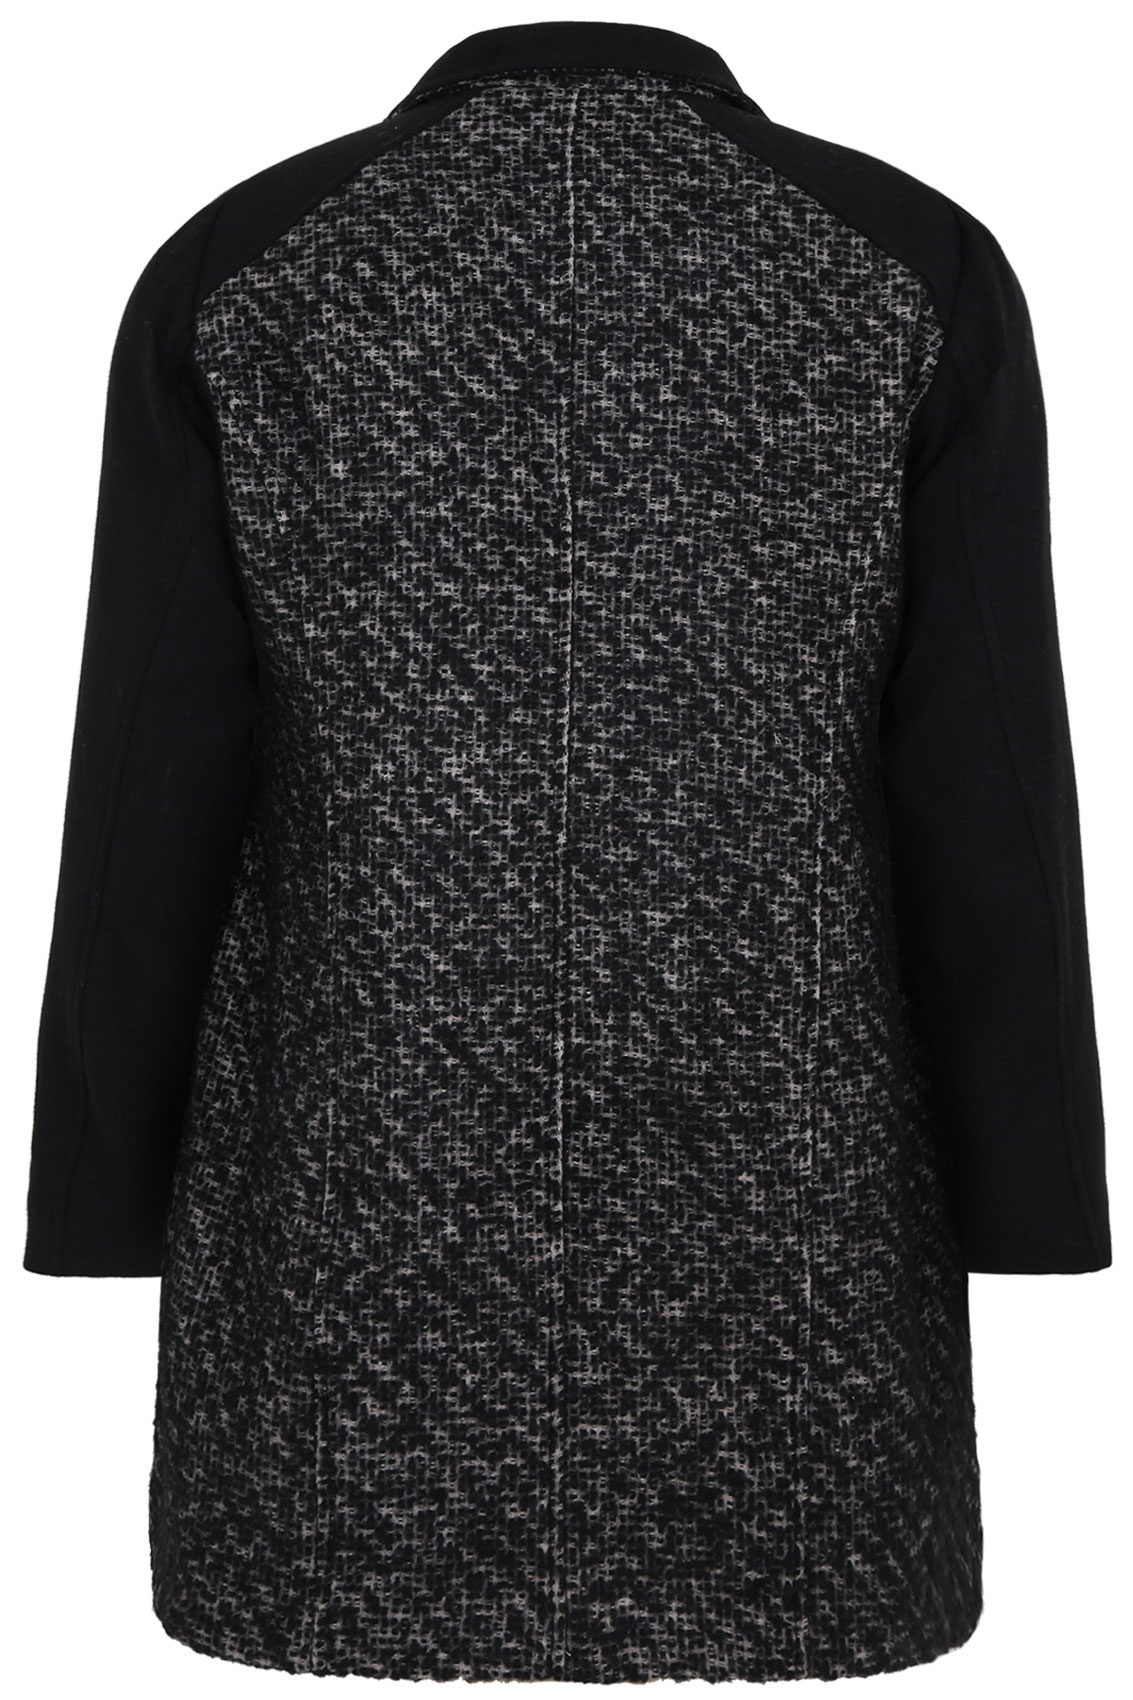 Grey and Black Tweed Coat with High Neck Collar Plus Size 16 to 32